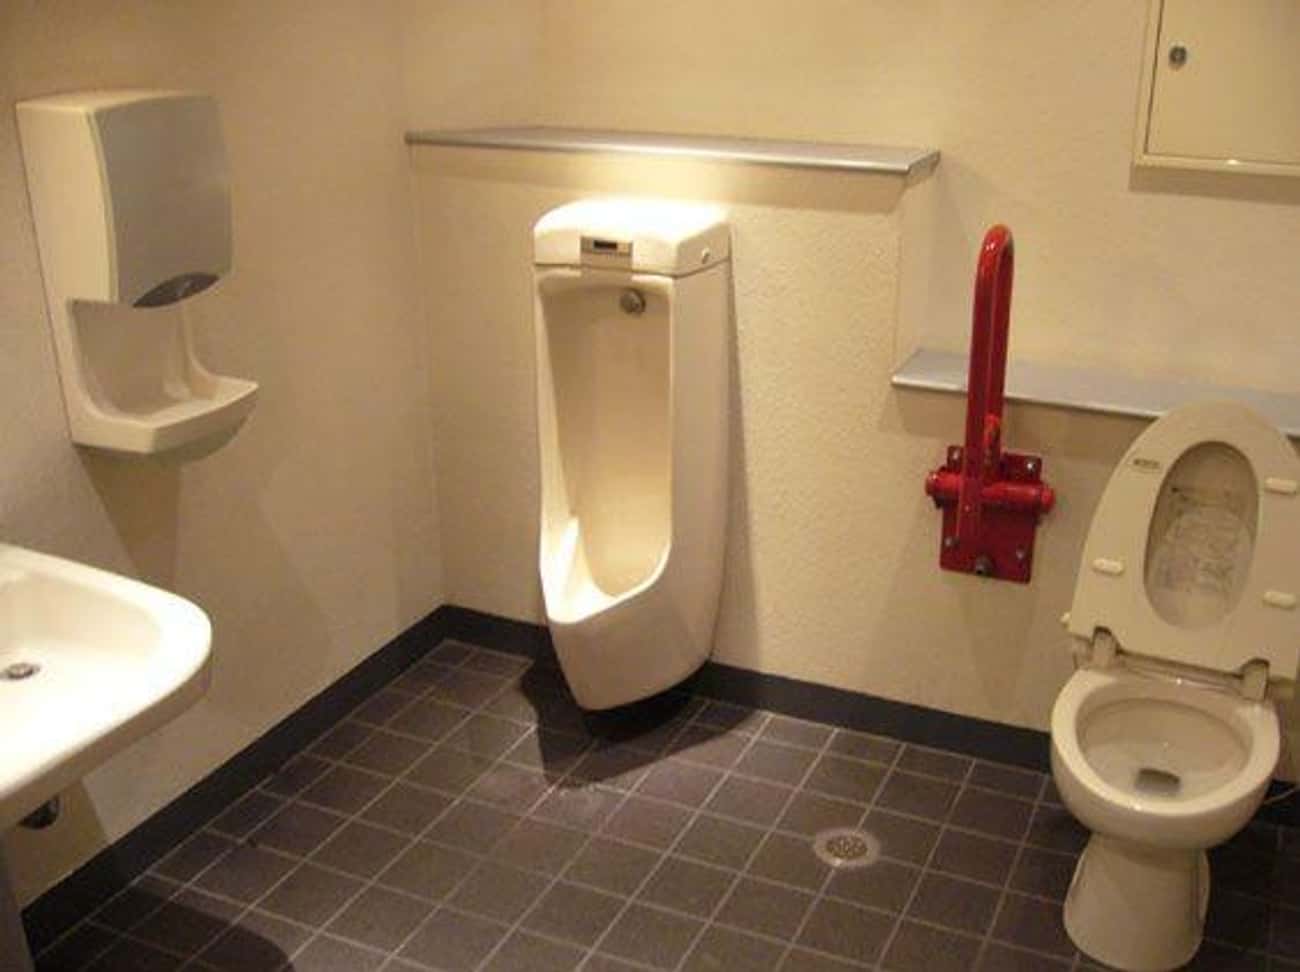 The Toilets Clean Themselves